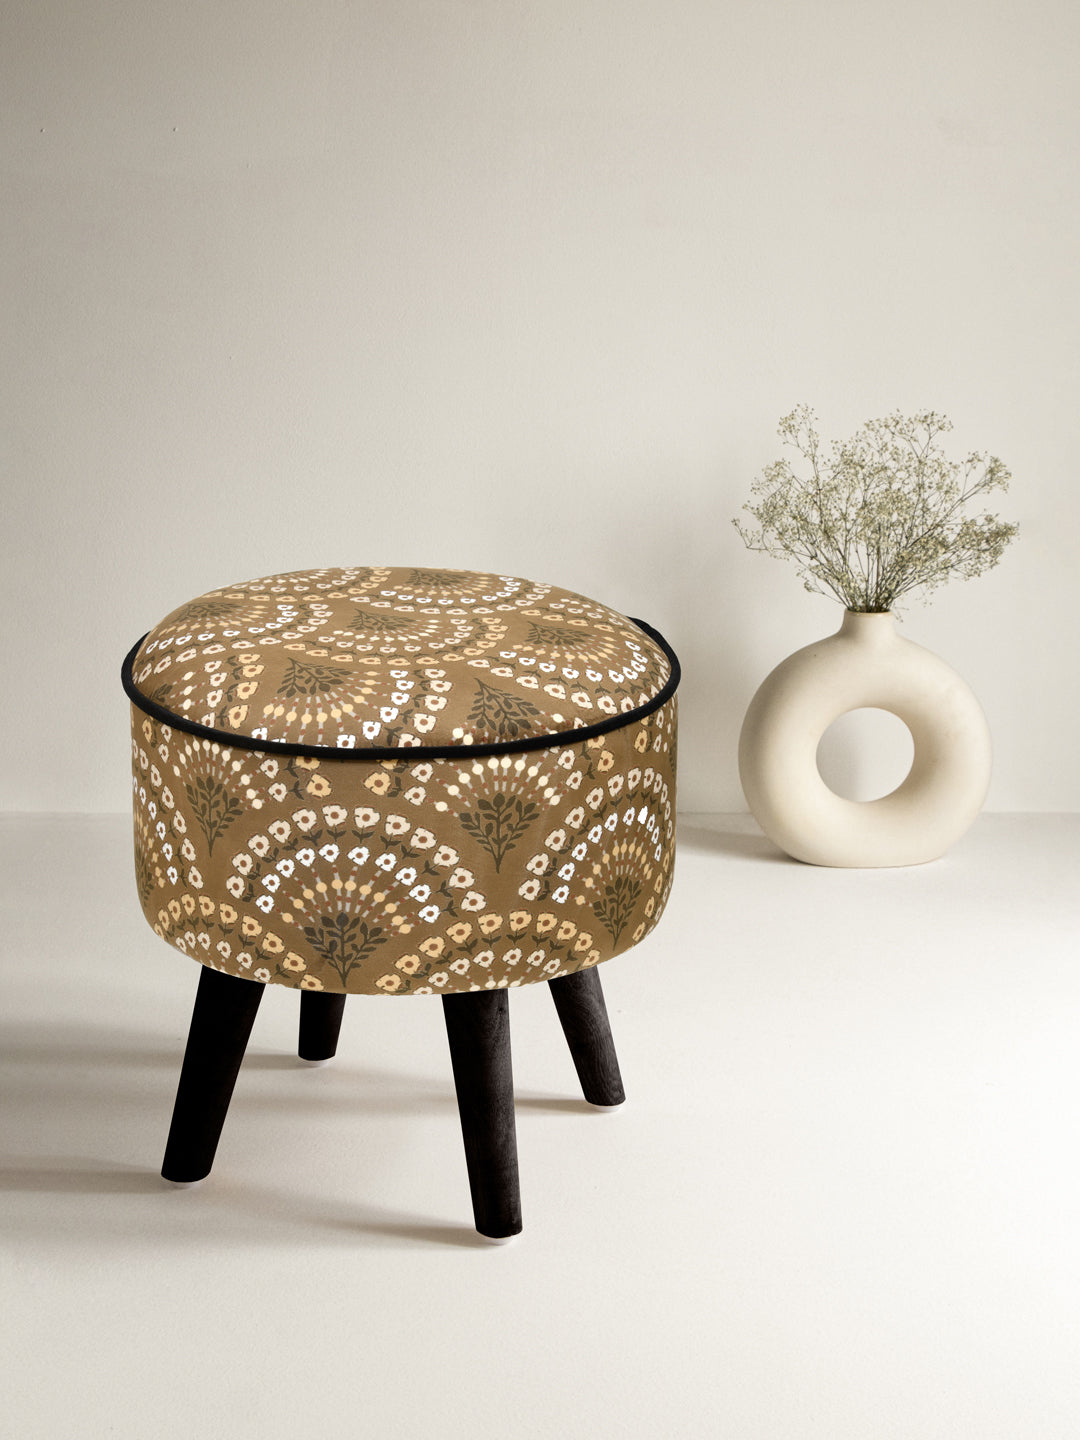 Brown Printed Ottoman With Wooden Legs